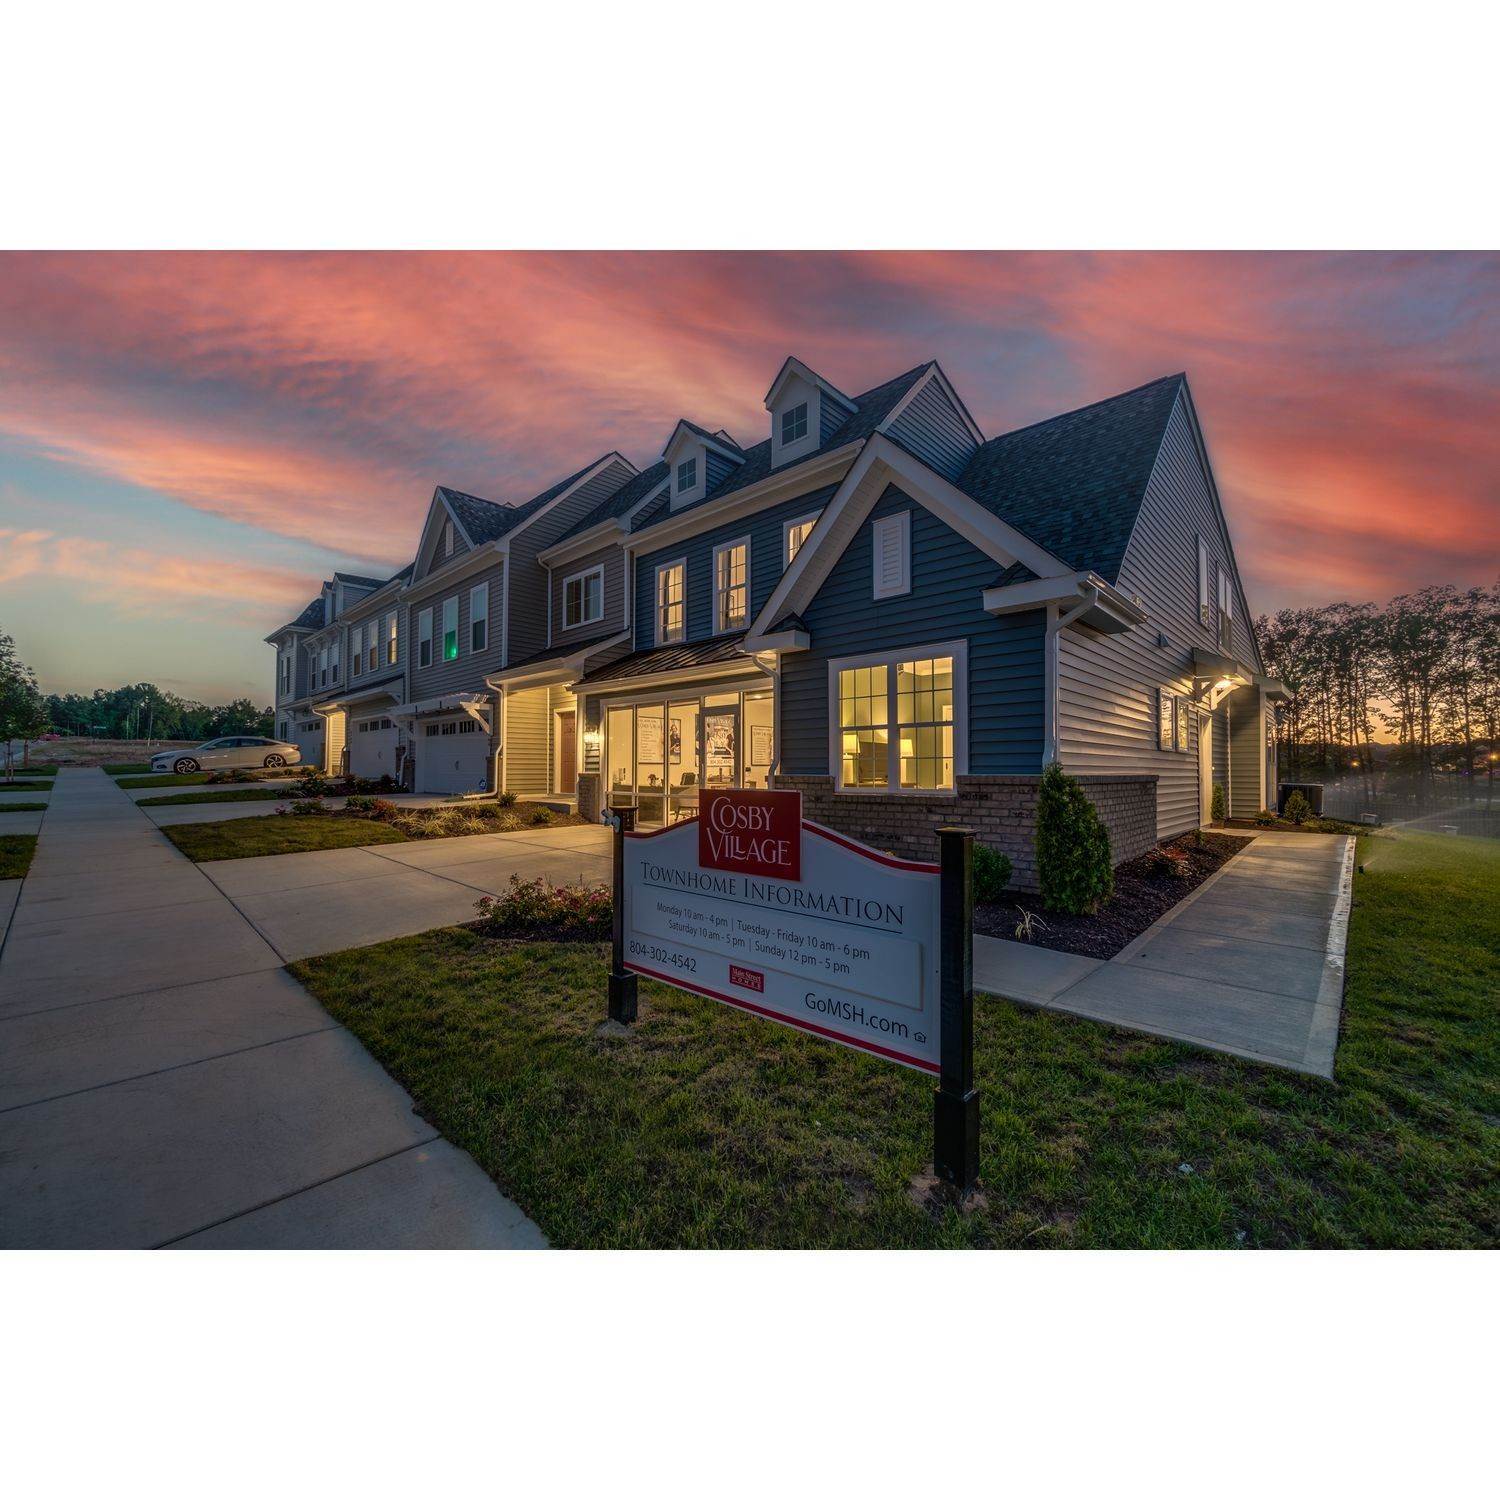 10. Cosby Village 2-Story Townhomes xây dựng tại 15220 Dunton Avenue, Chesterfield, VA 23832